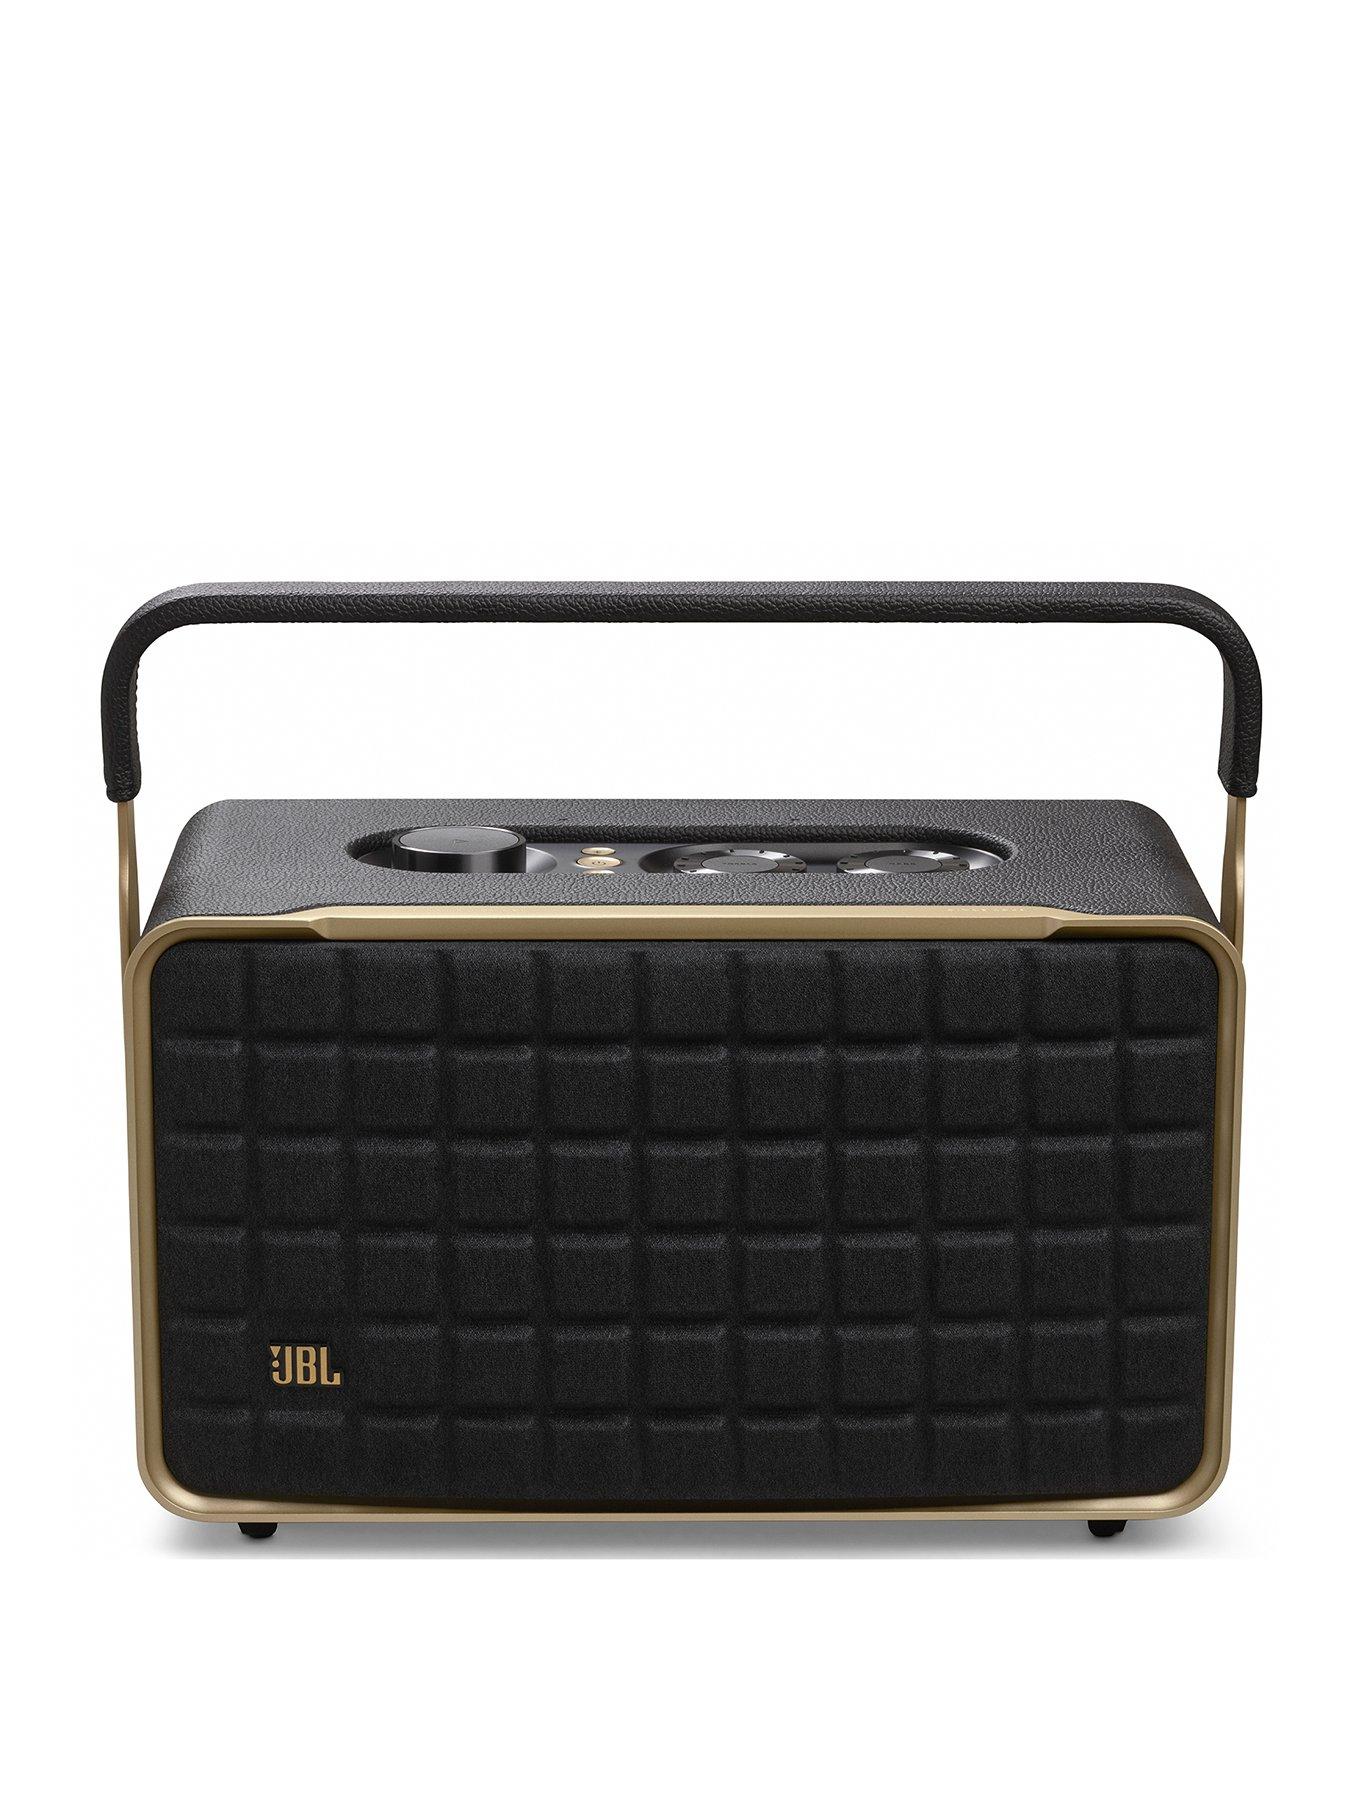 JBL Authentics 200 Smart Home Speaker with WIFI